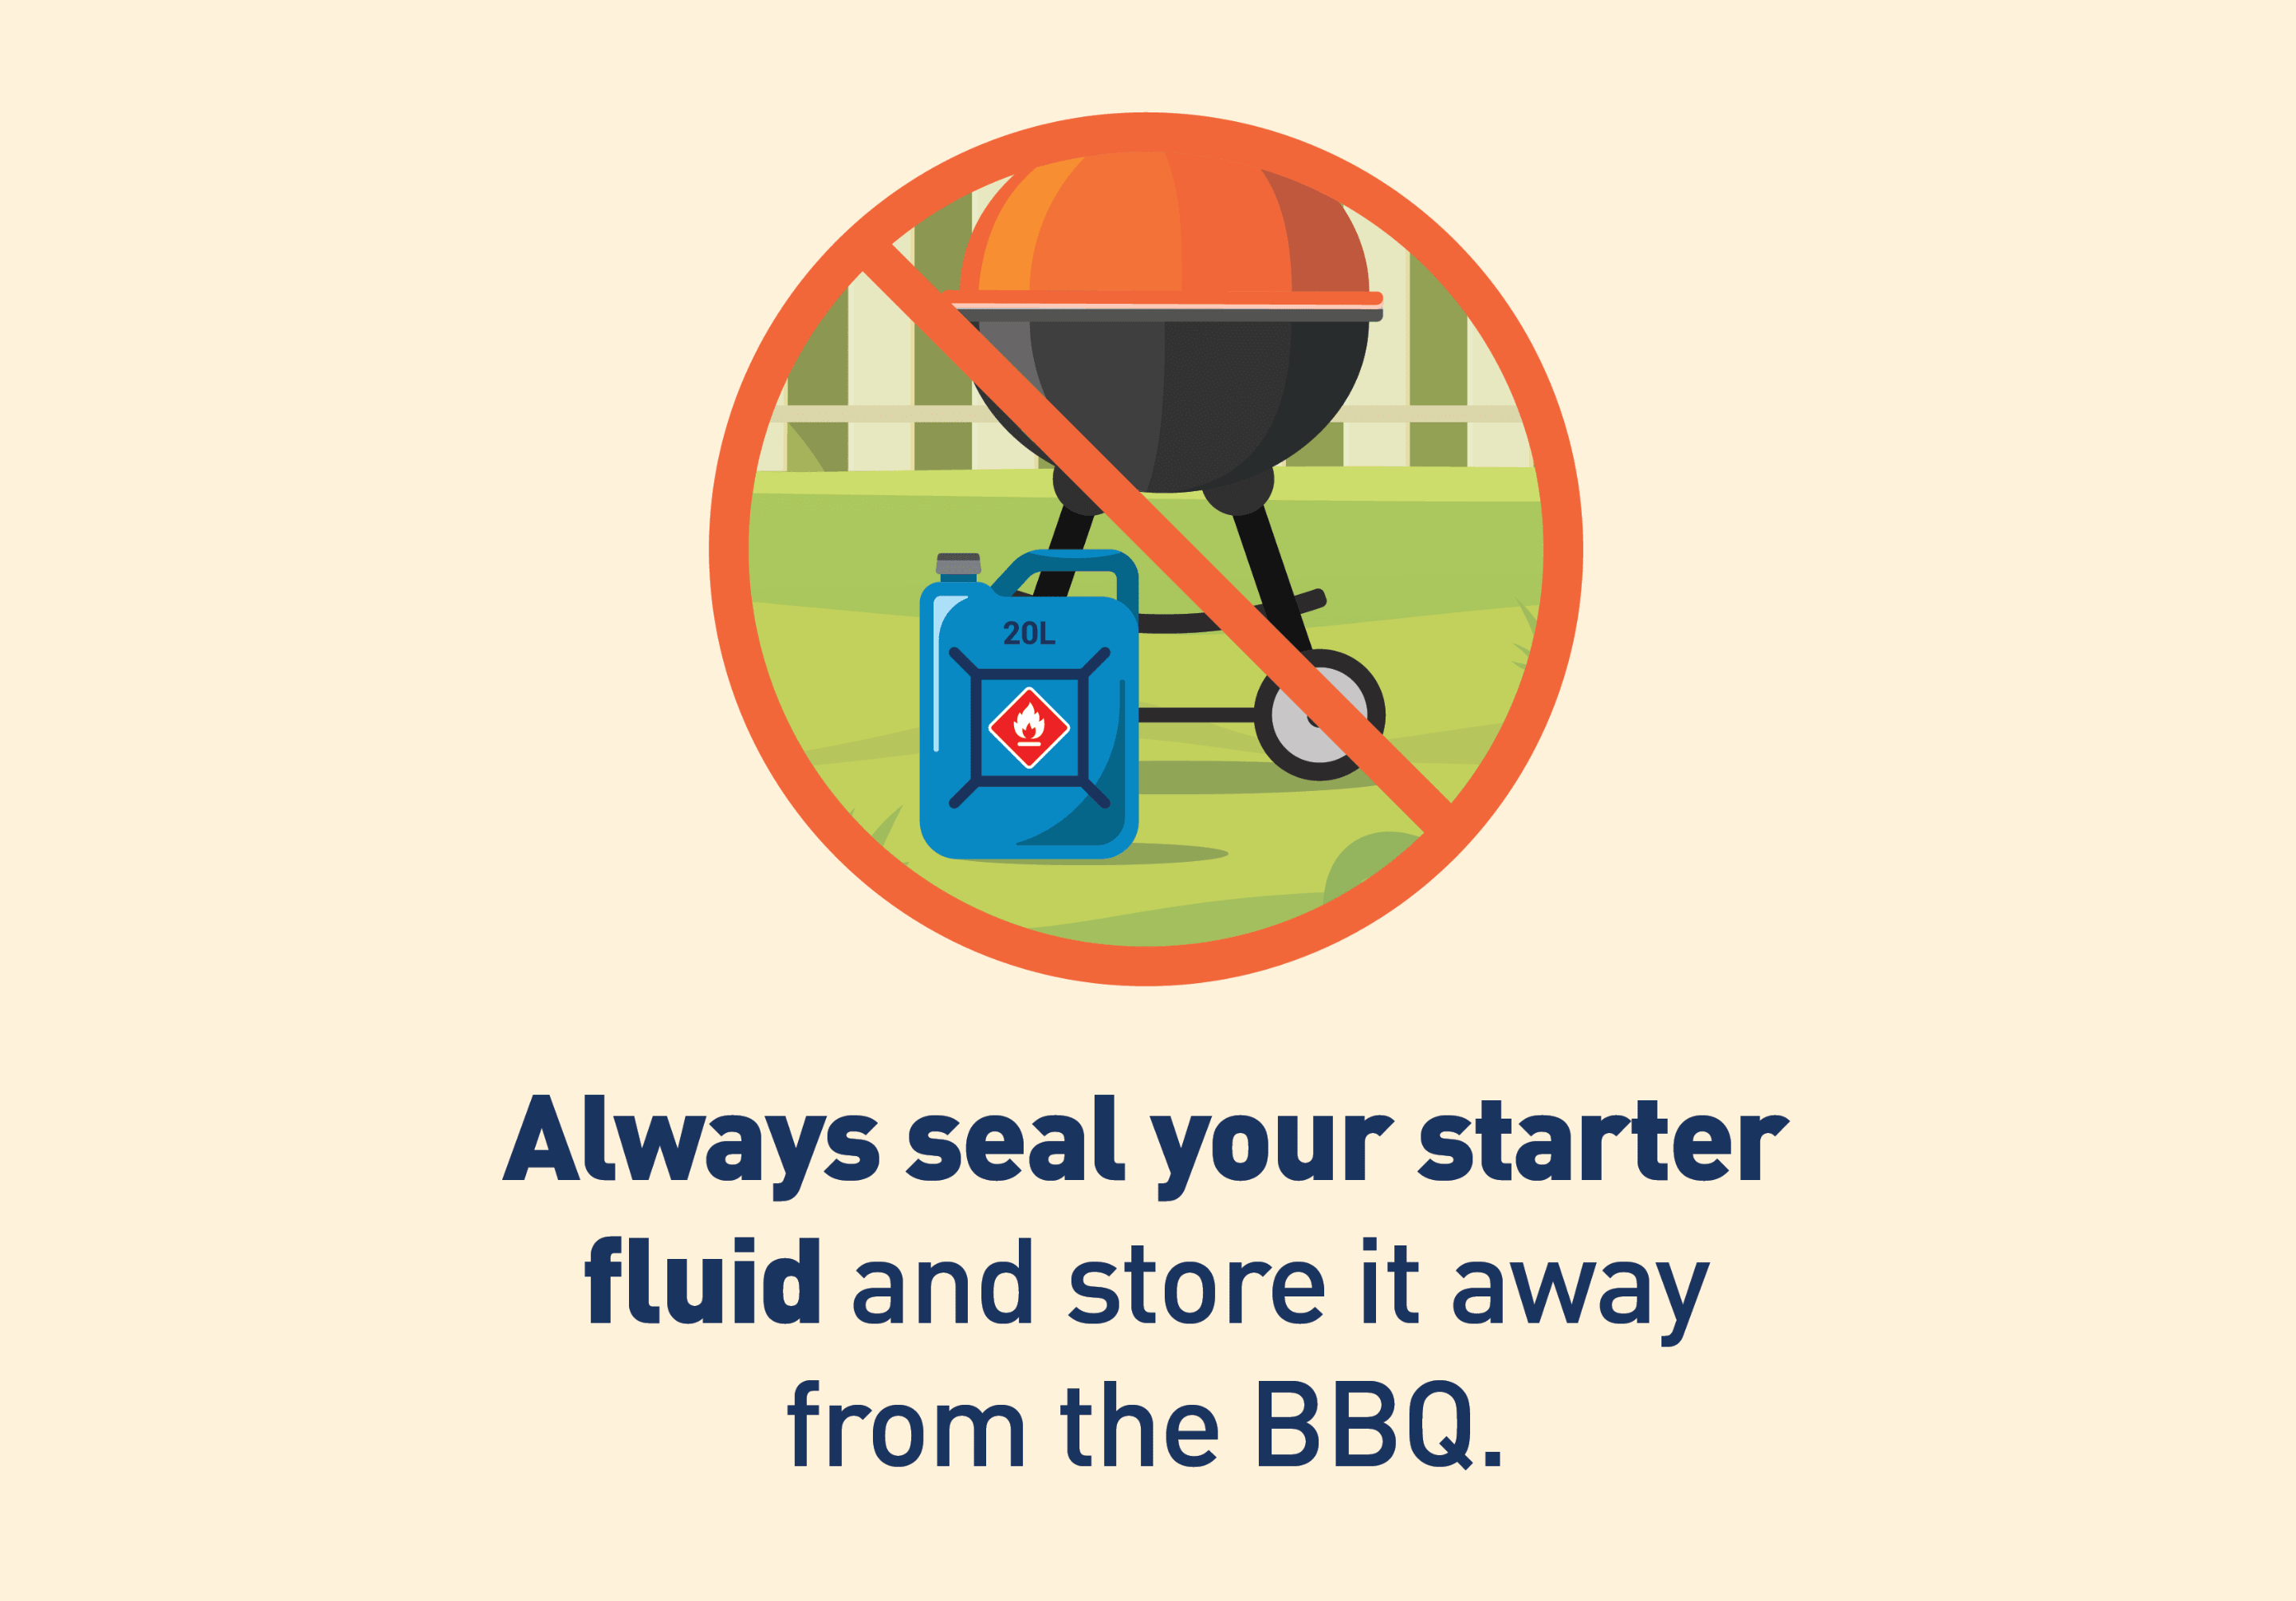 Graphic of sealed starter fluid bottle. Text: Always seal your starter fluid and store it away from the BBQ.